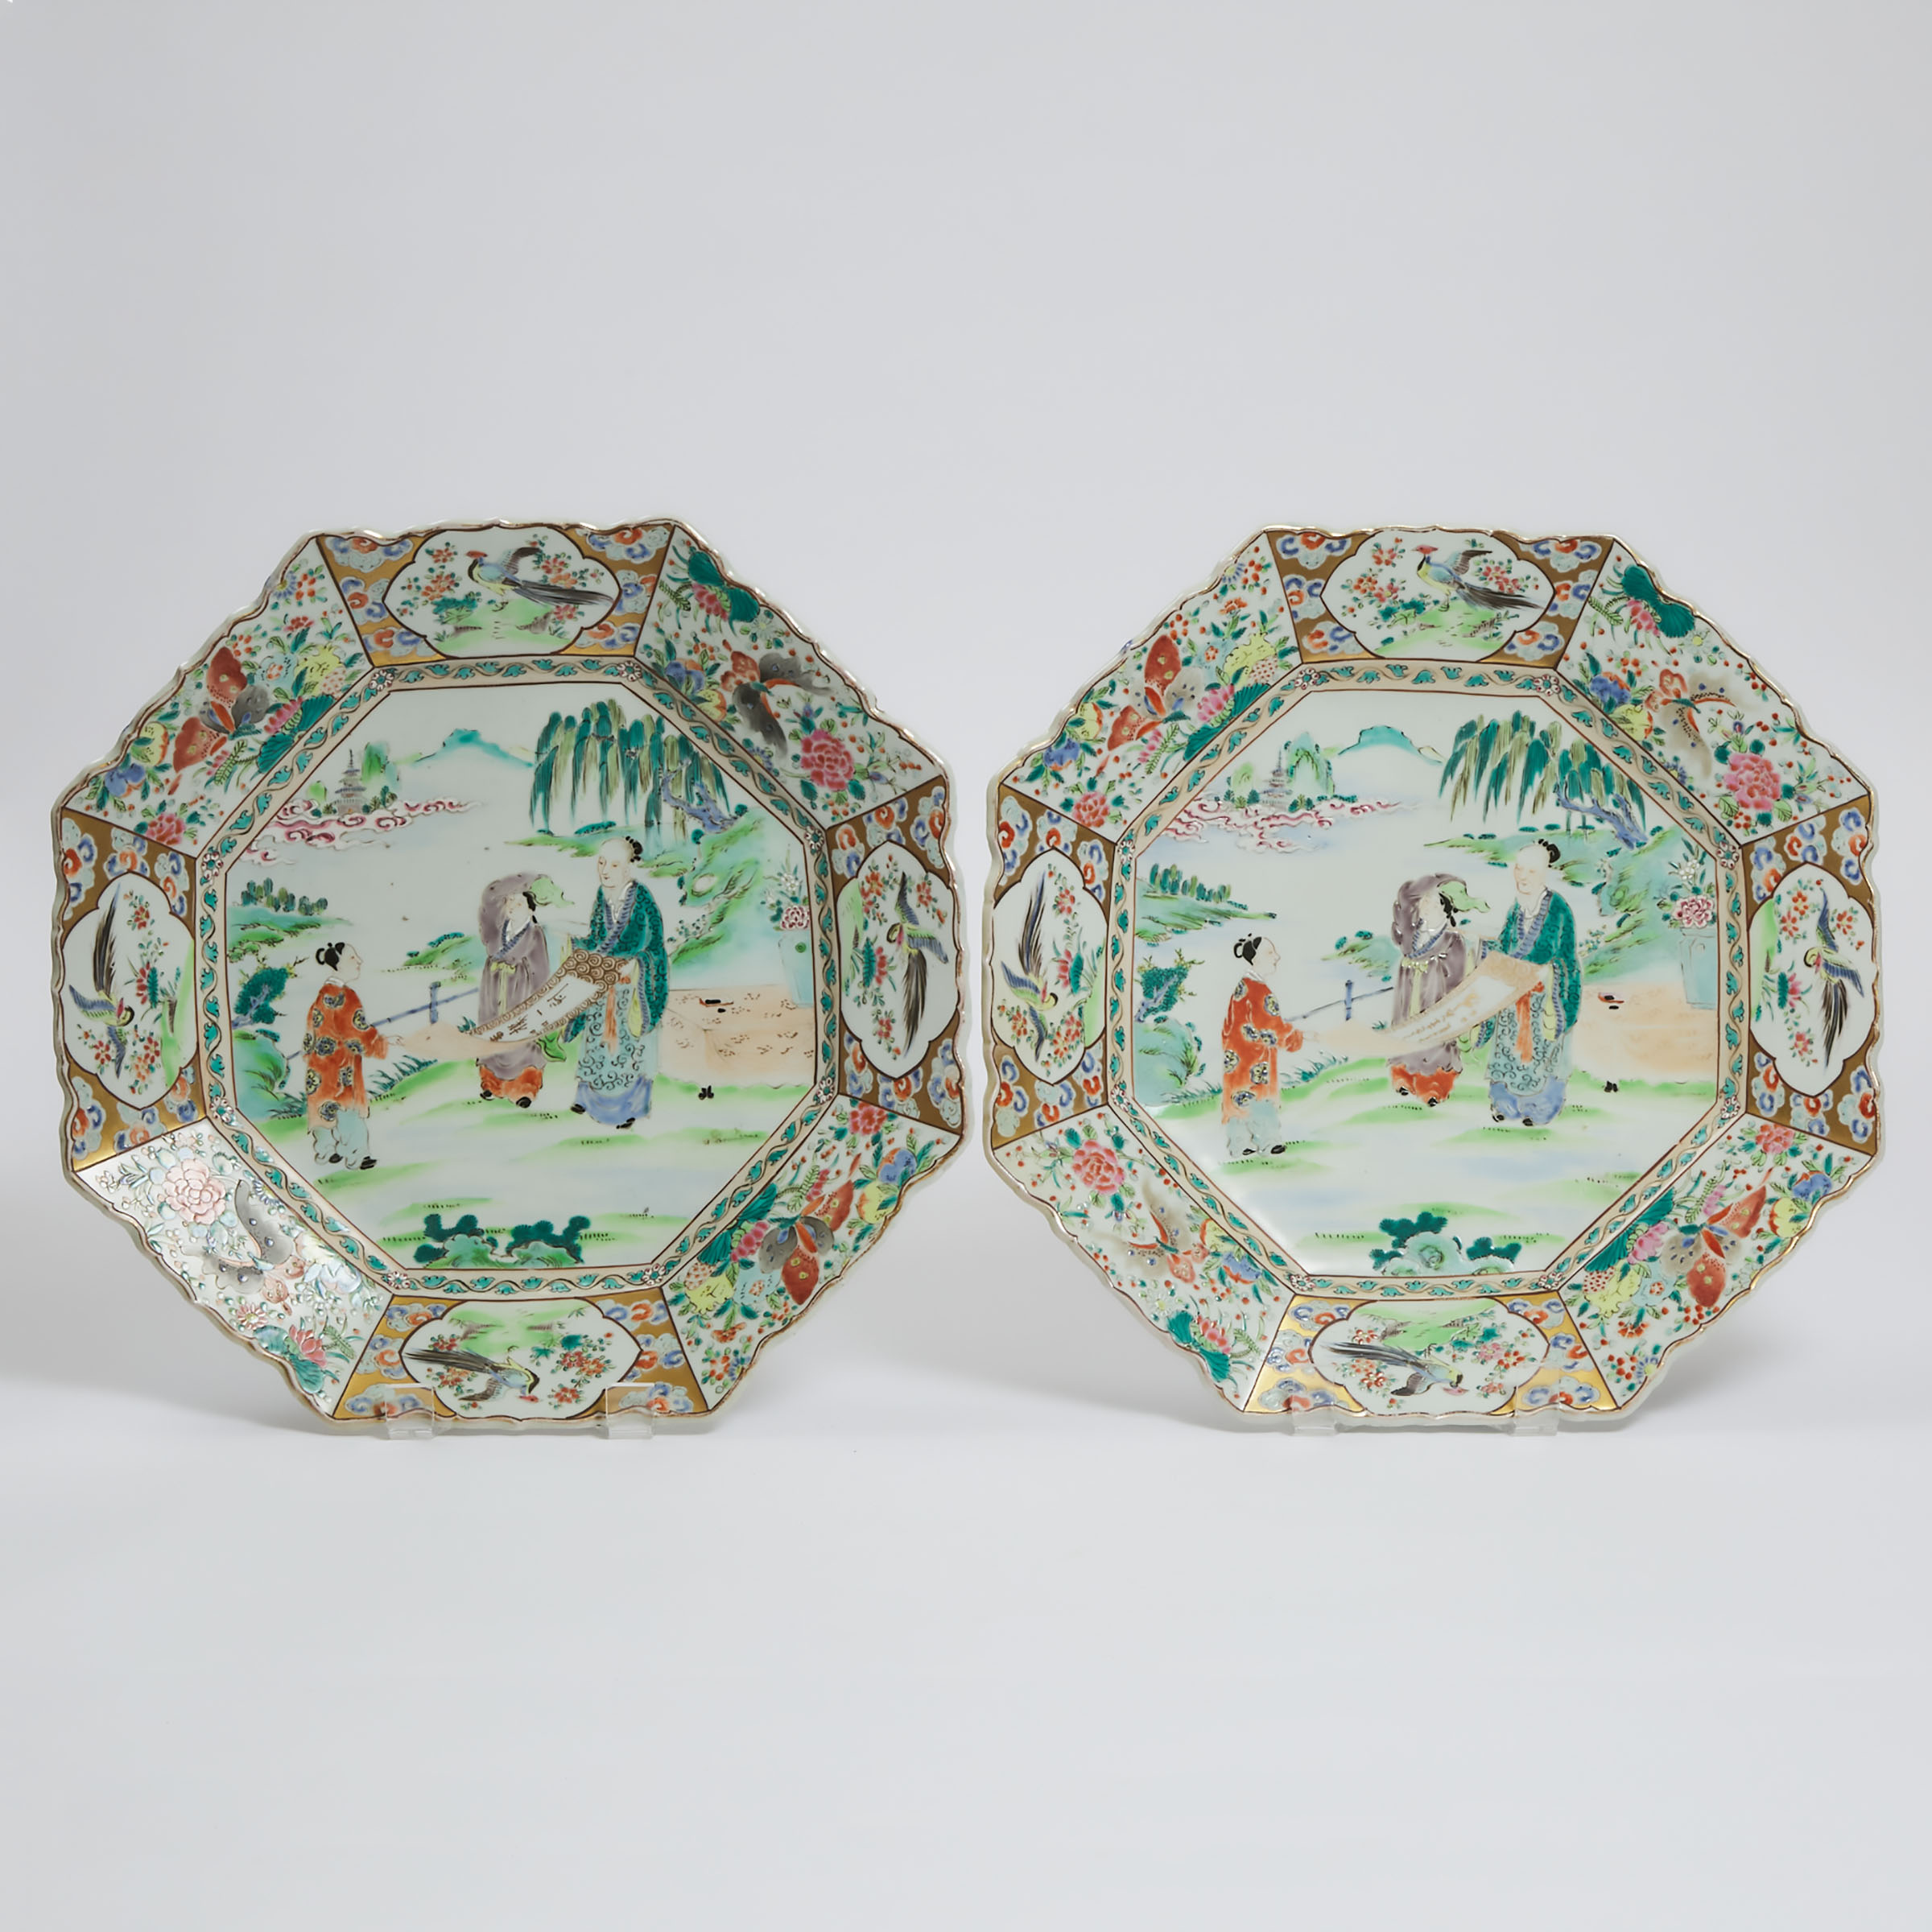 A Pair of Large Arita Gilt and Polychrome Enameled Octagonal Chargers, 18th/19th Century